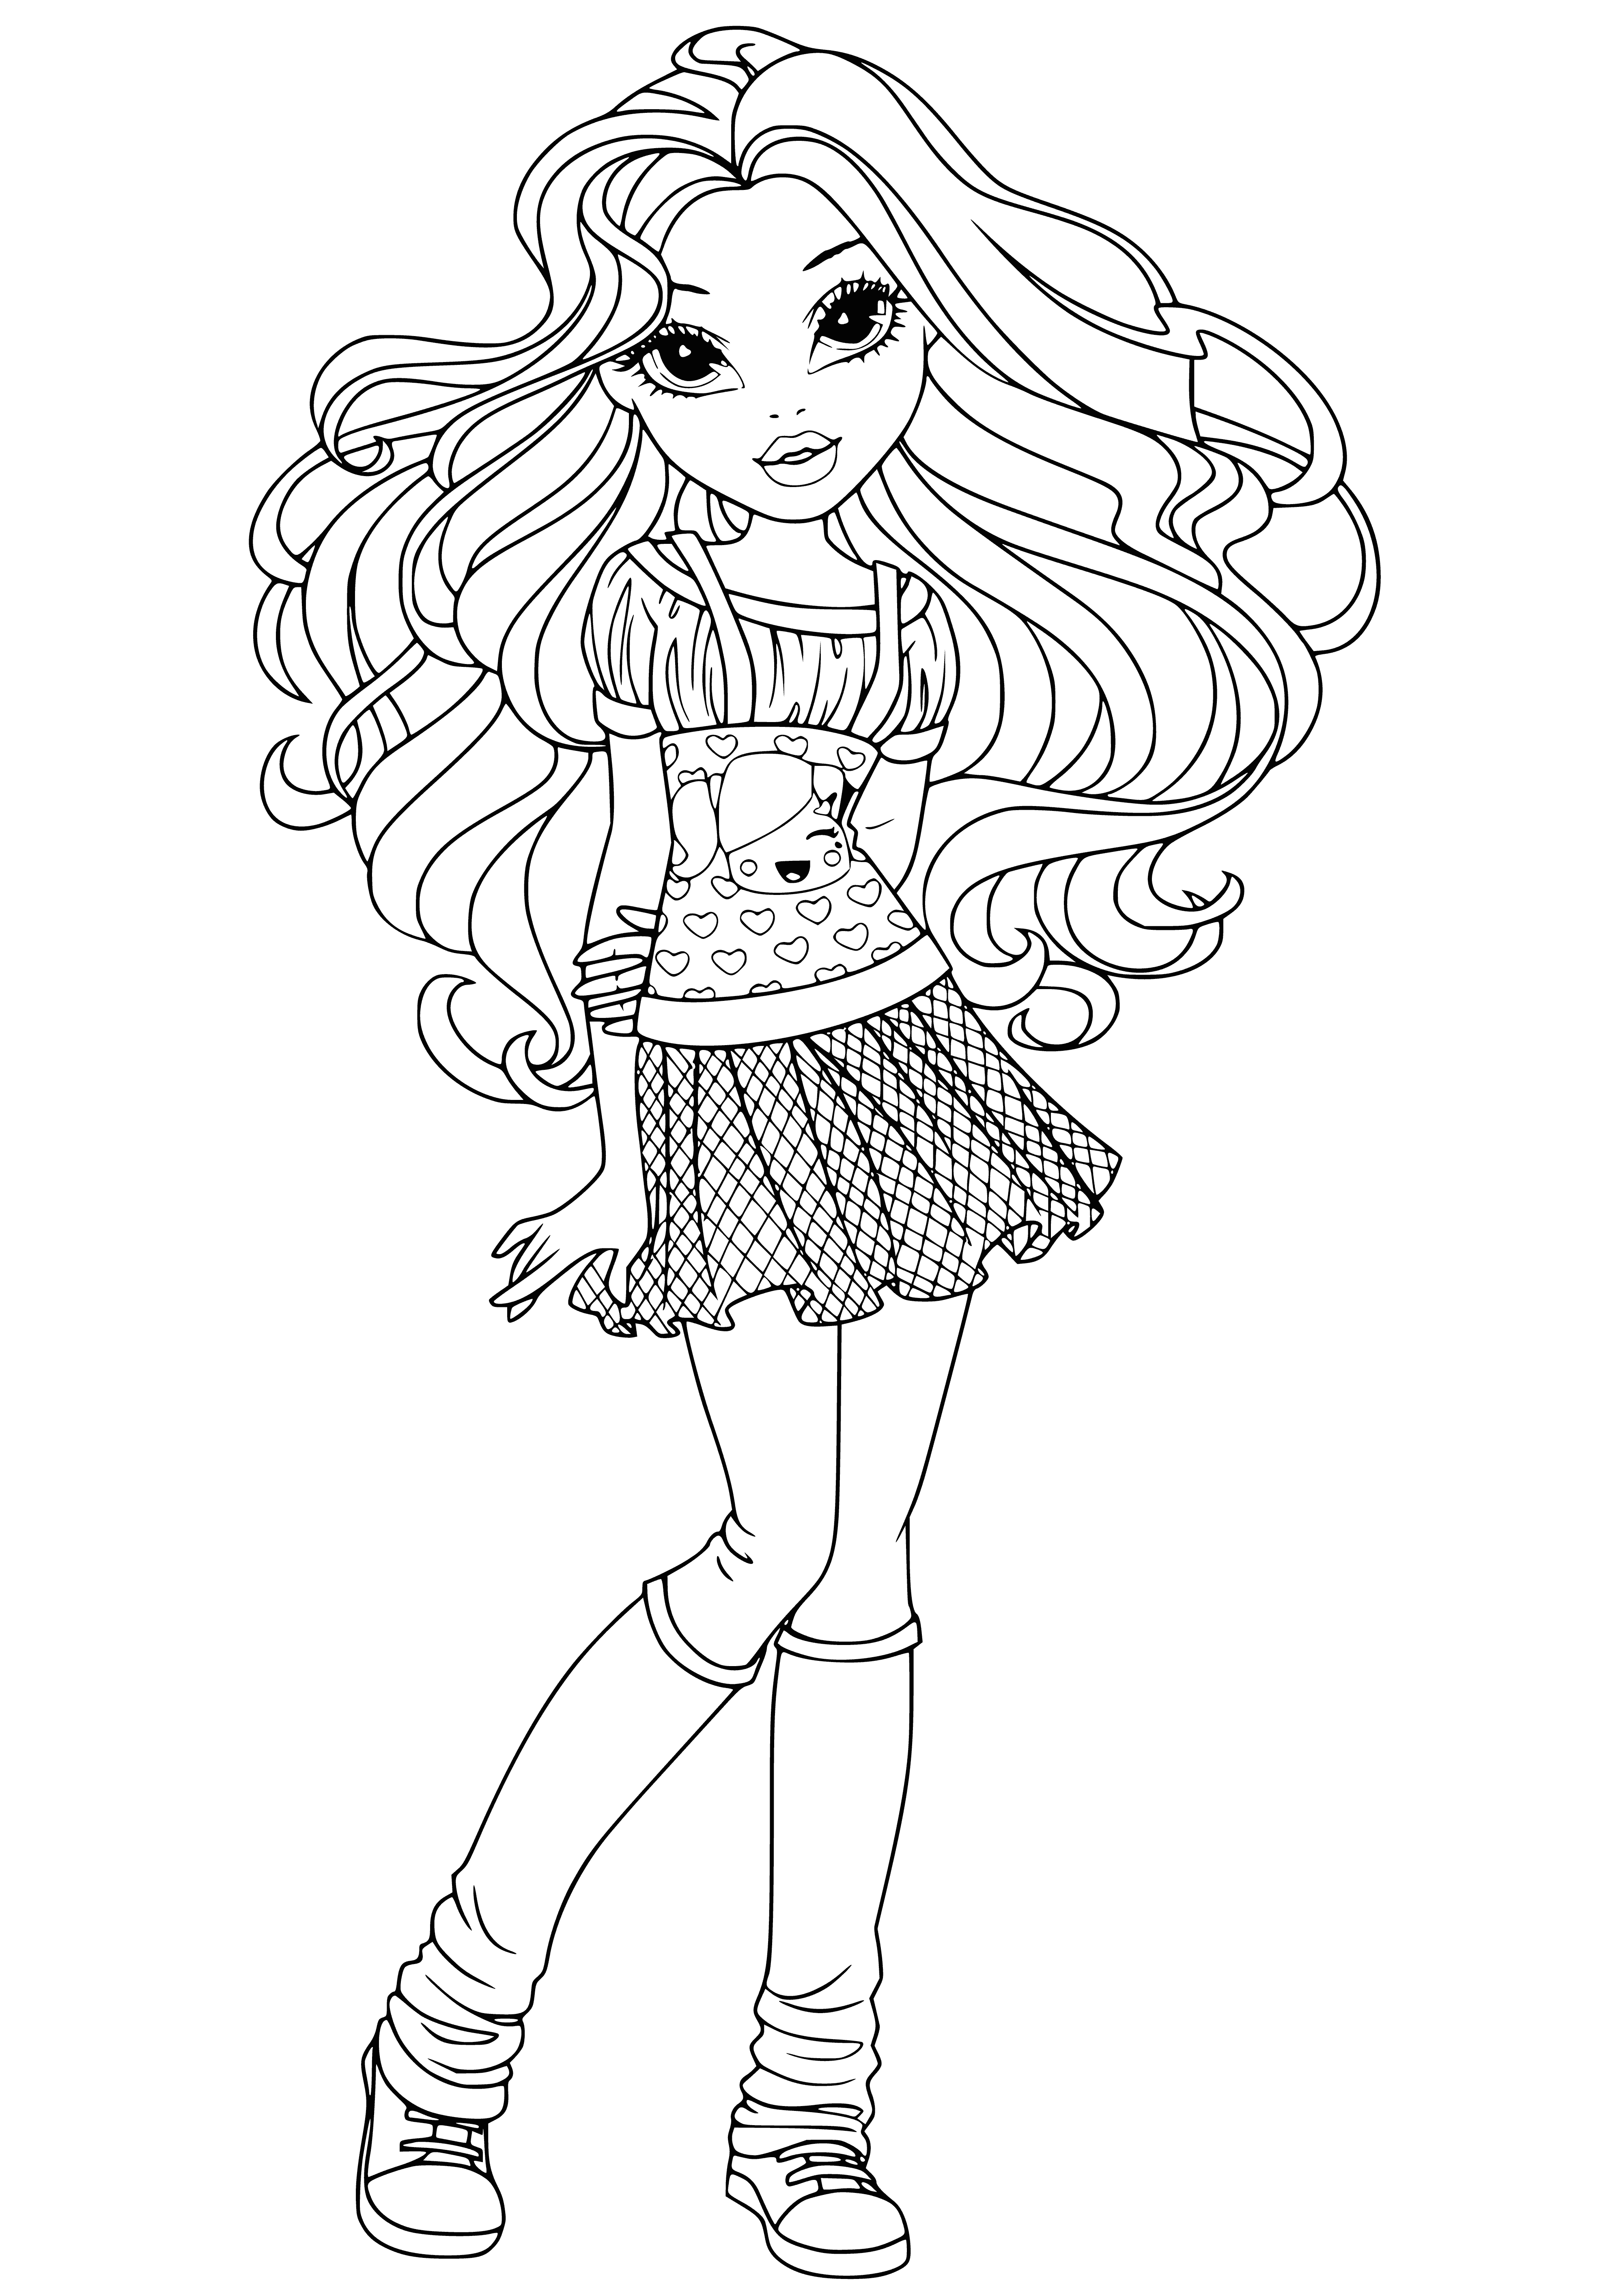 coloring page: Girl with light brown skin & black hair wears white shirt, striped skirt, headband, scarf & shoes.